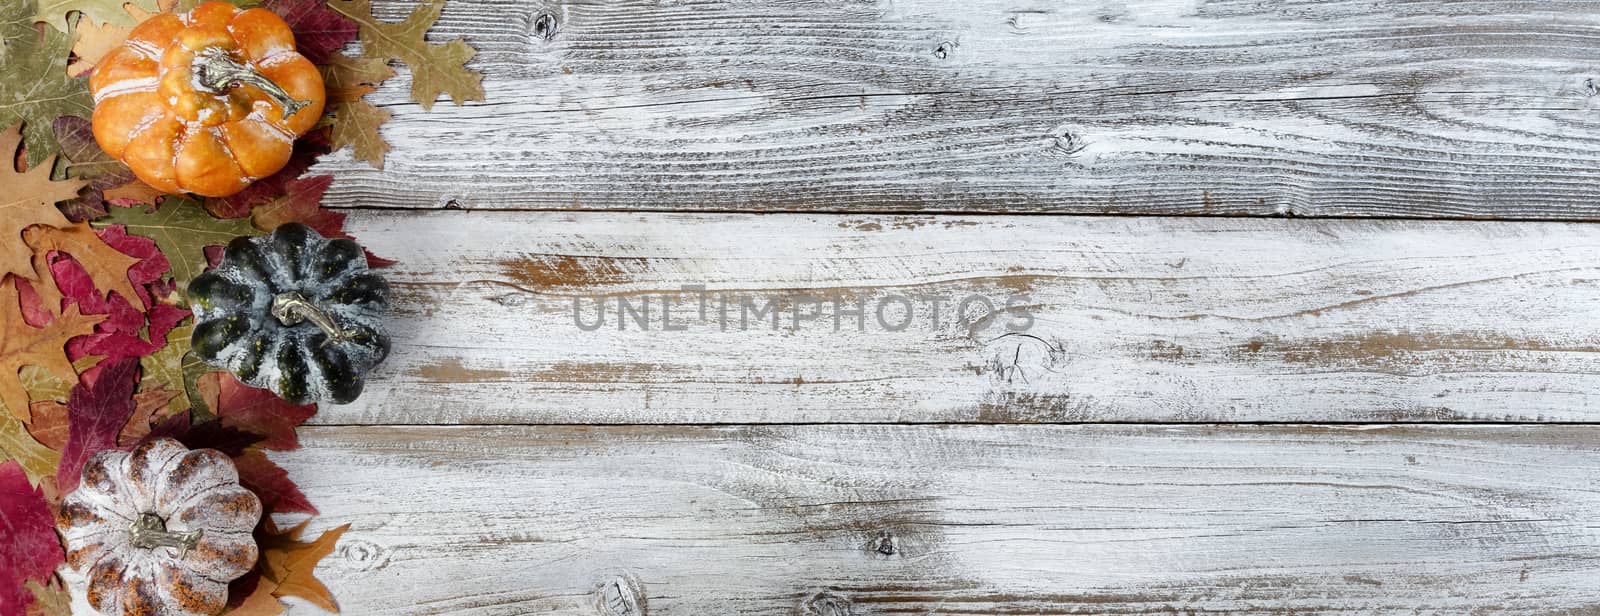 Autumn colorful leaves and gourds on white rustic wooden background for the Thanksgiving holiday season